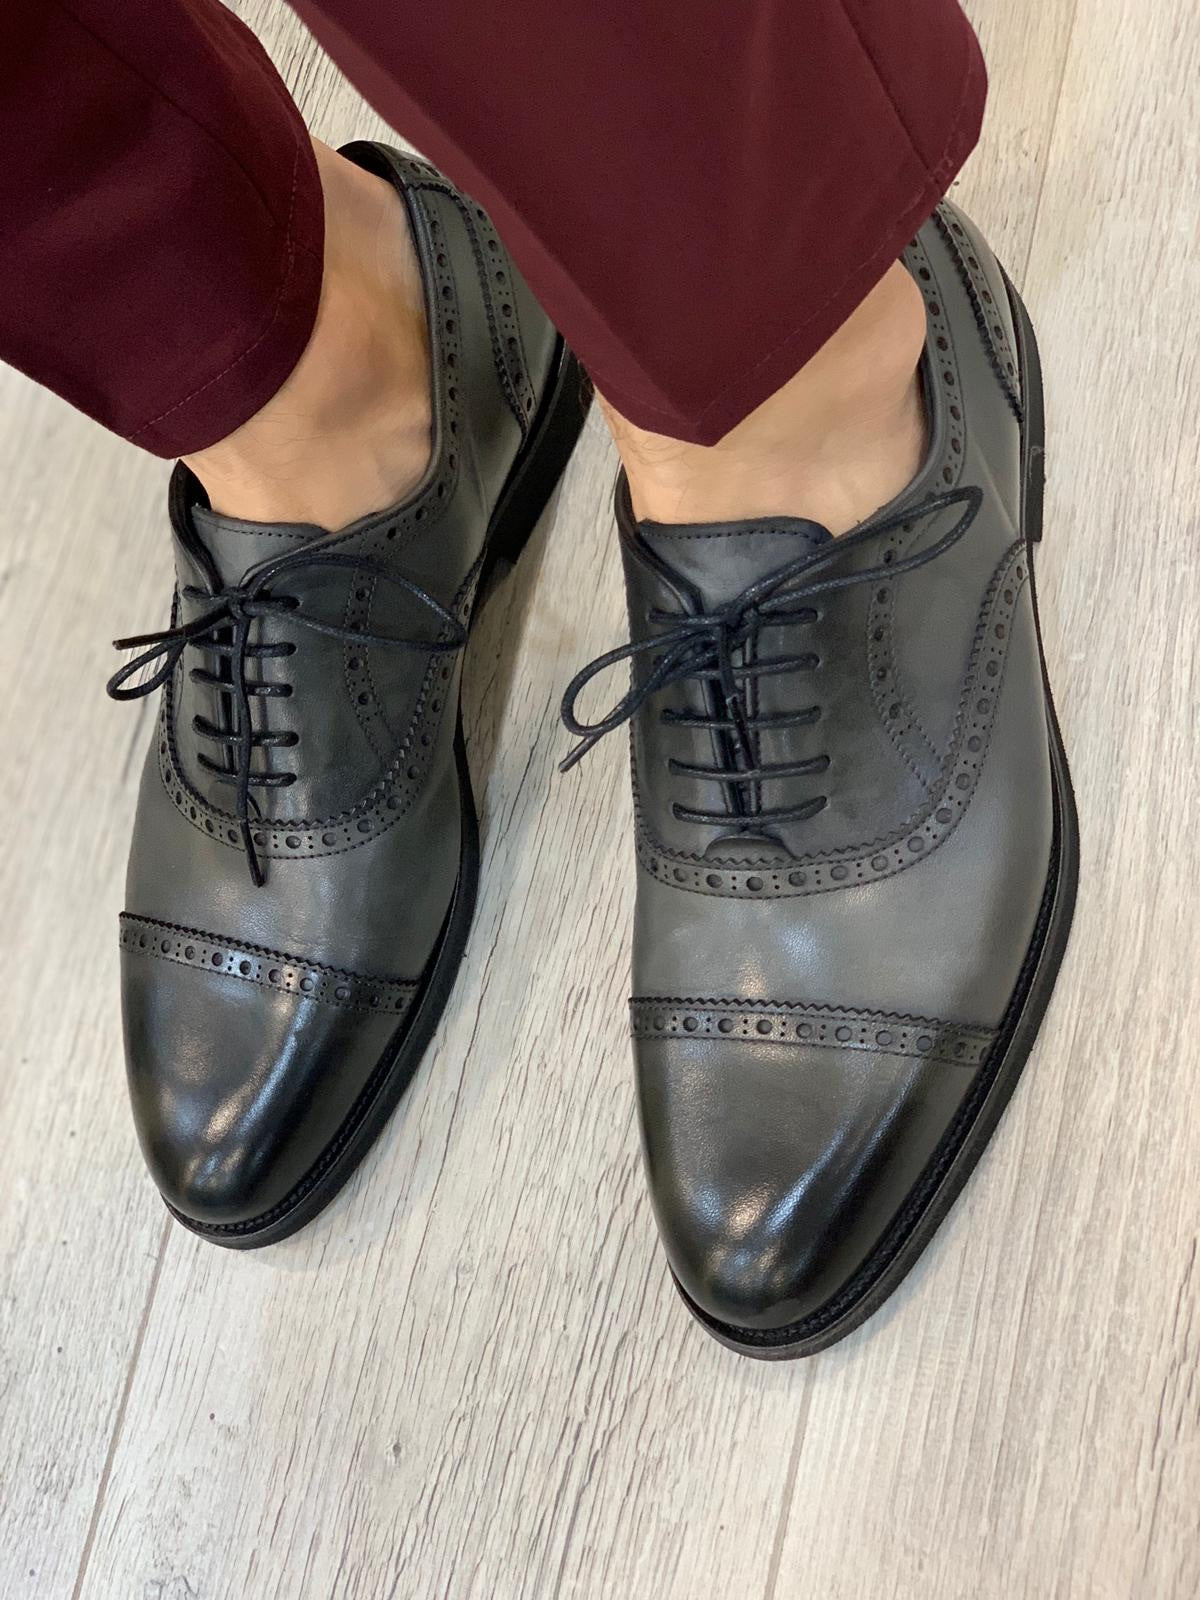 Ade Gray Lace Up Cap Toe Oxfords